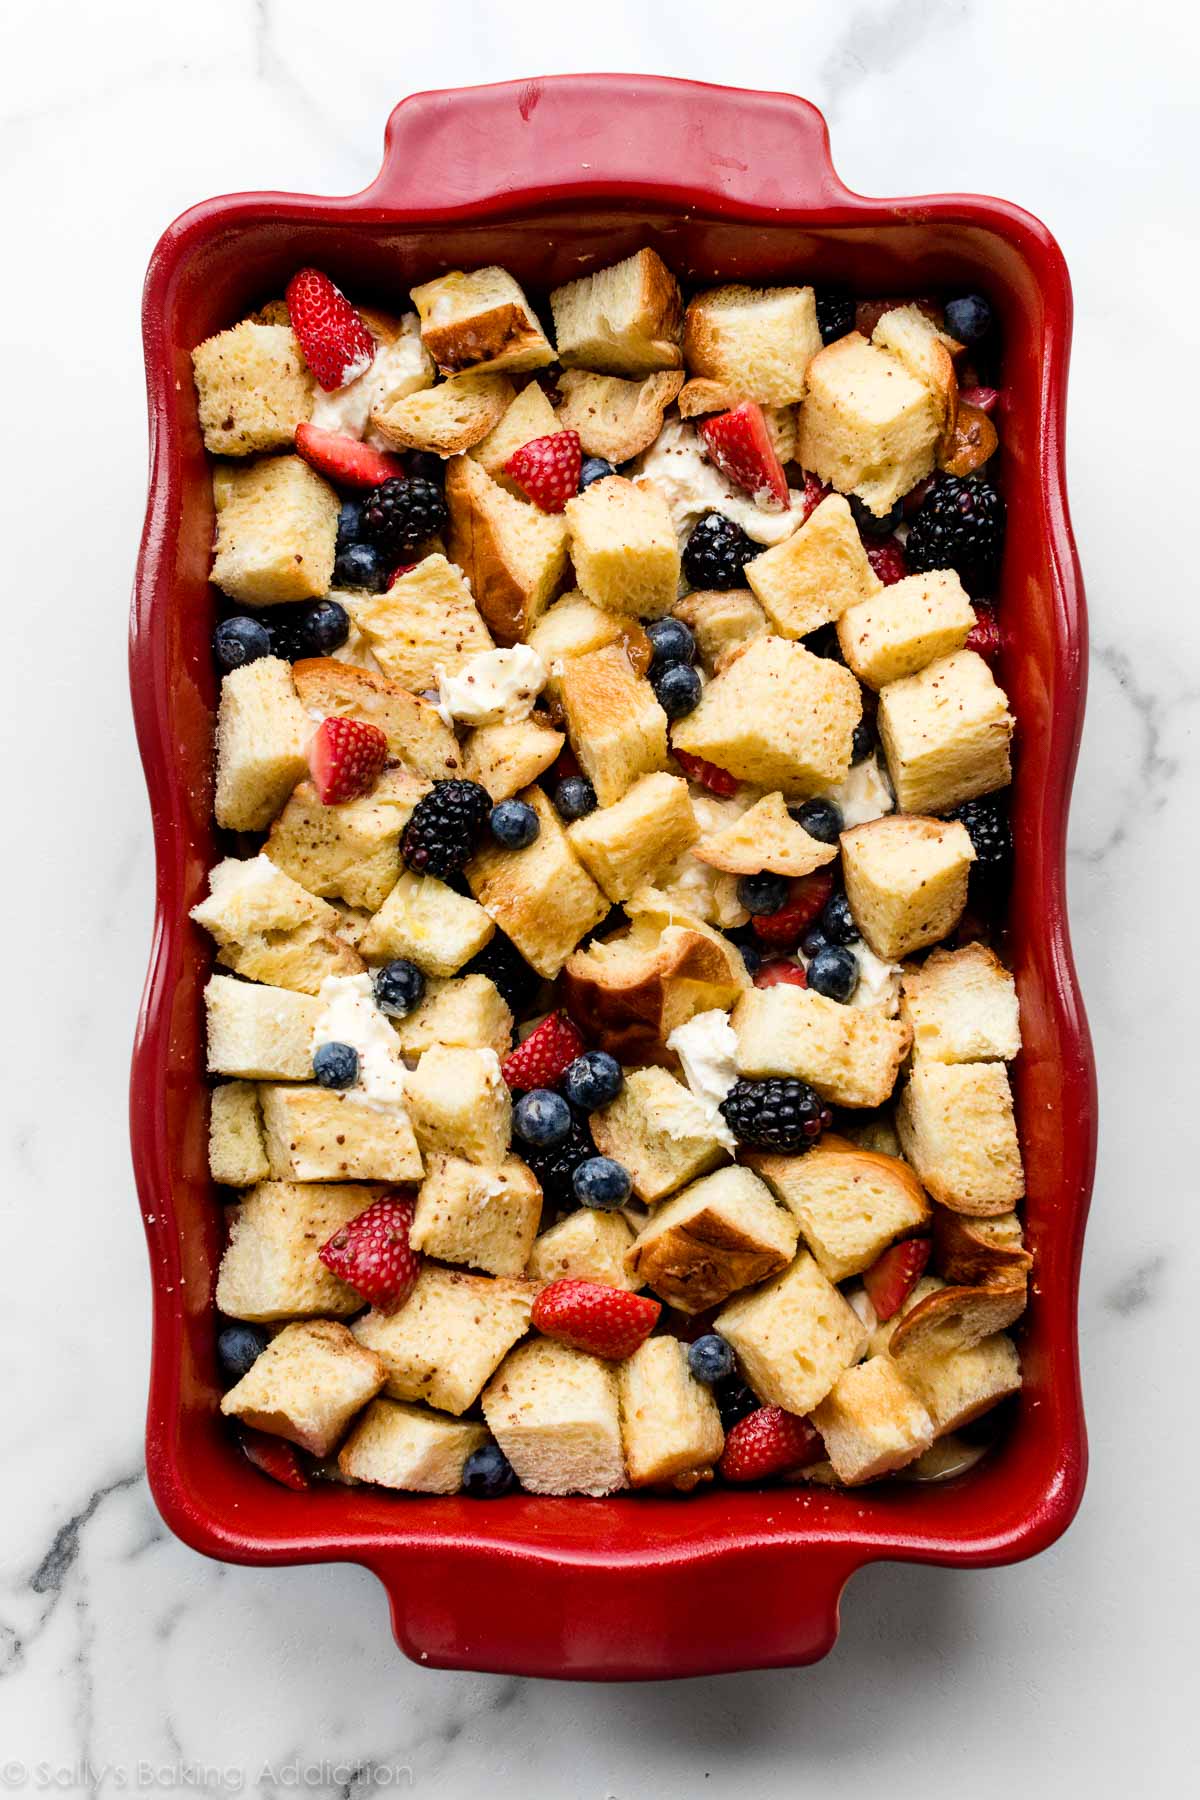 diced shawl bread, berries և cream cheese mixture sliced ​​in a red pan